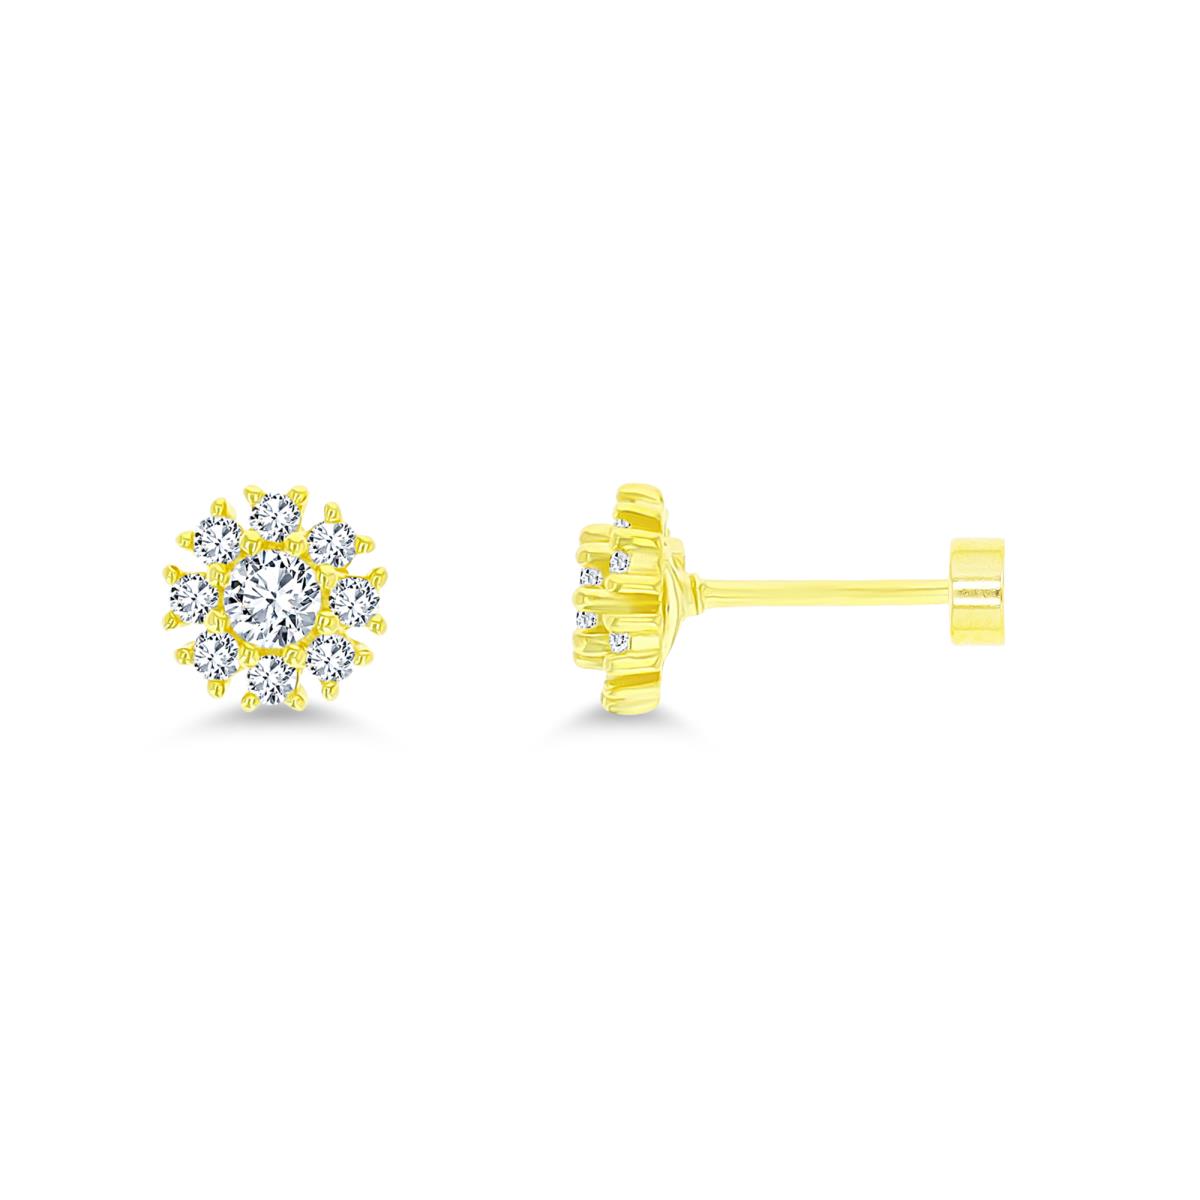 Sterling Silver Yellow 3mm Round Pave 7mm Flat Back Stud Earrings